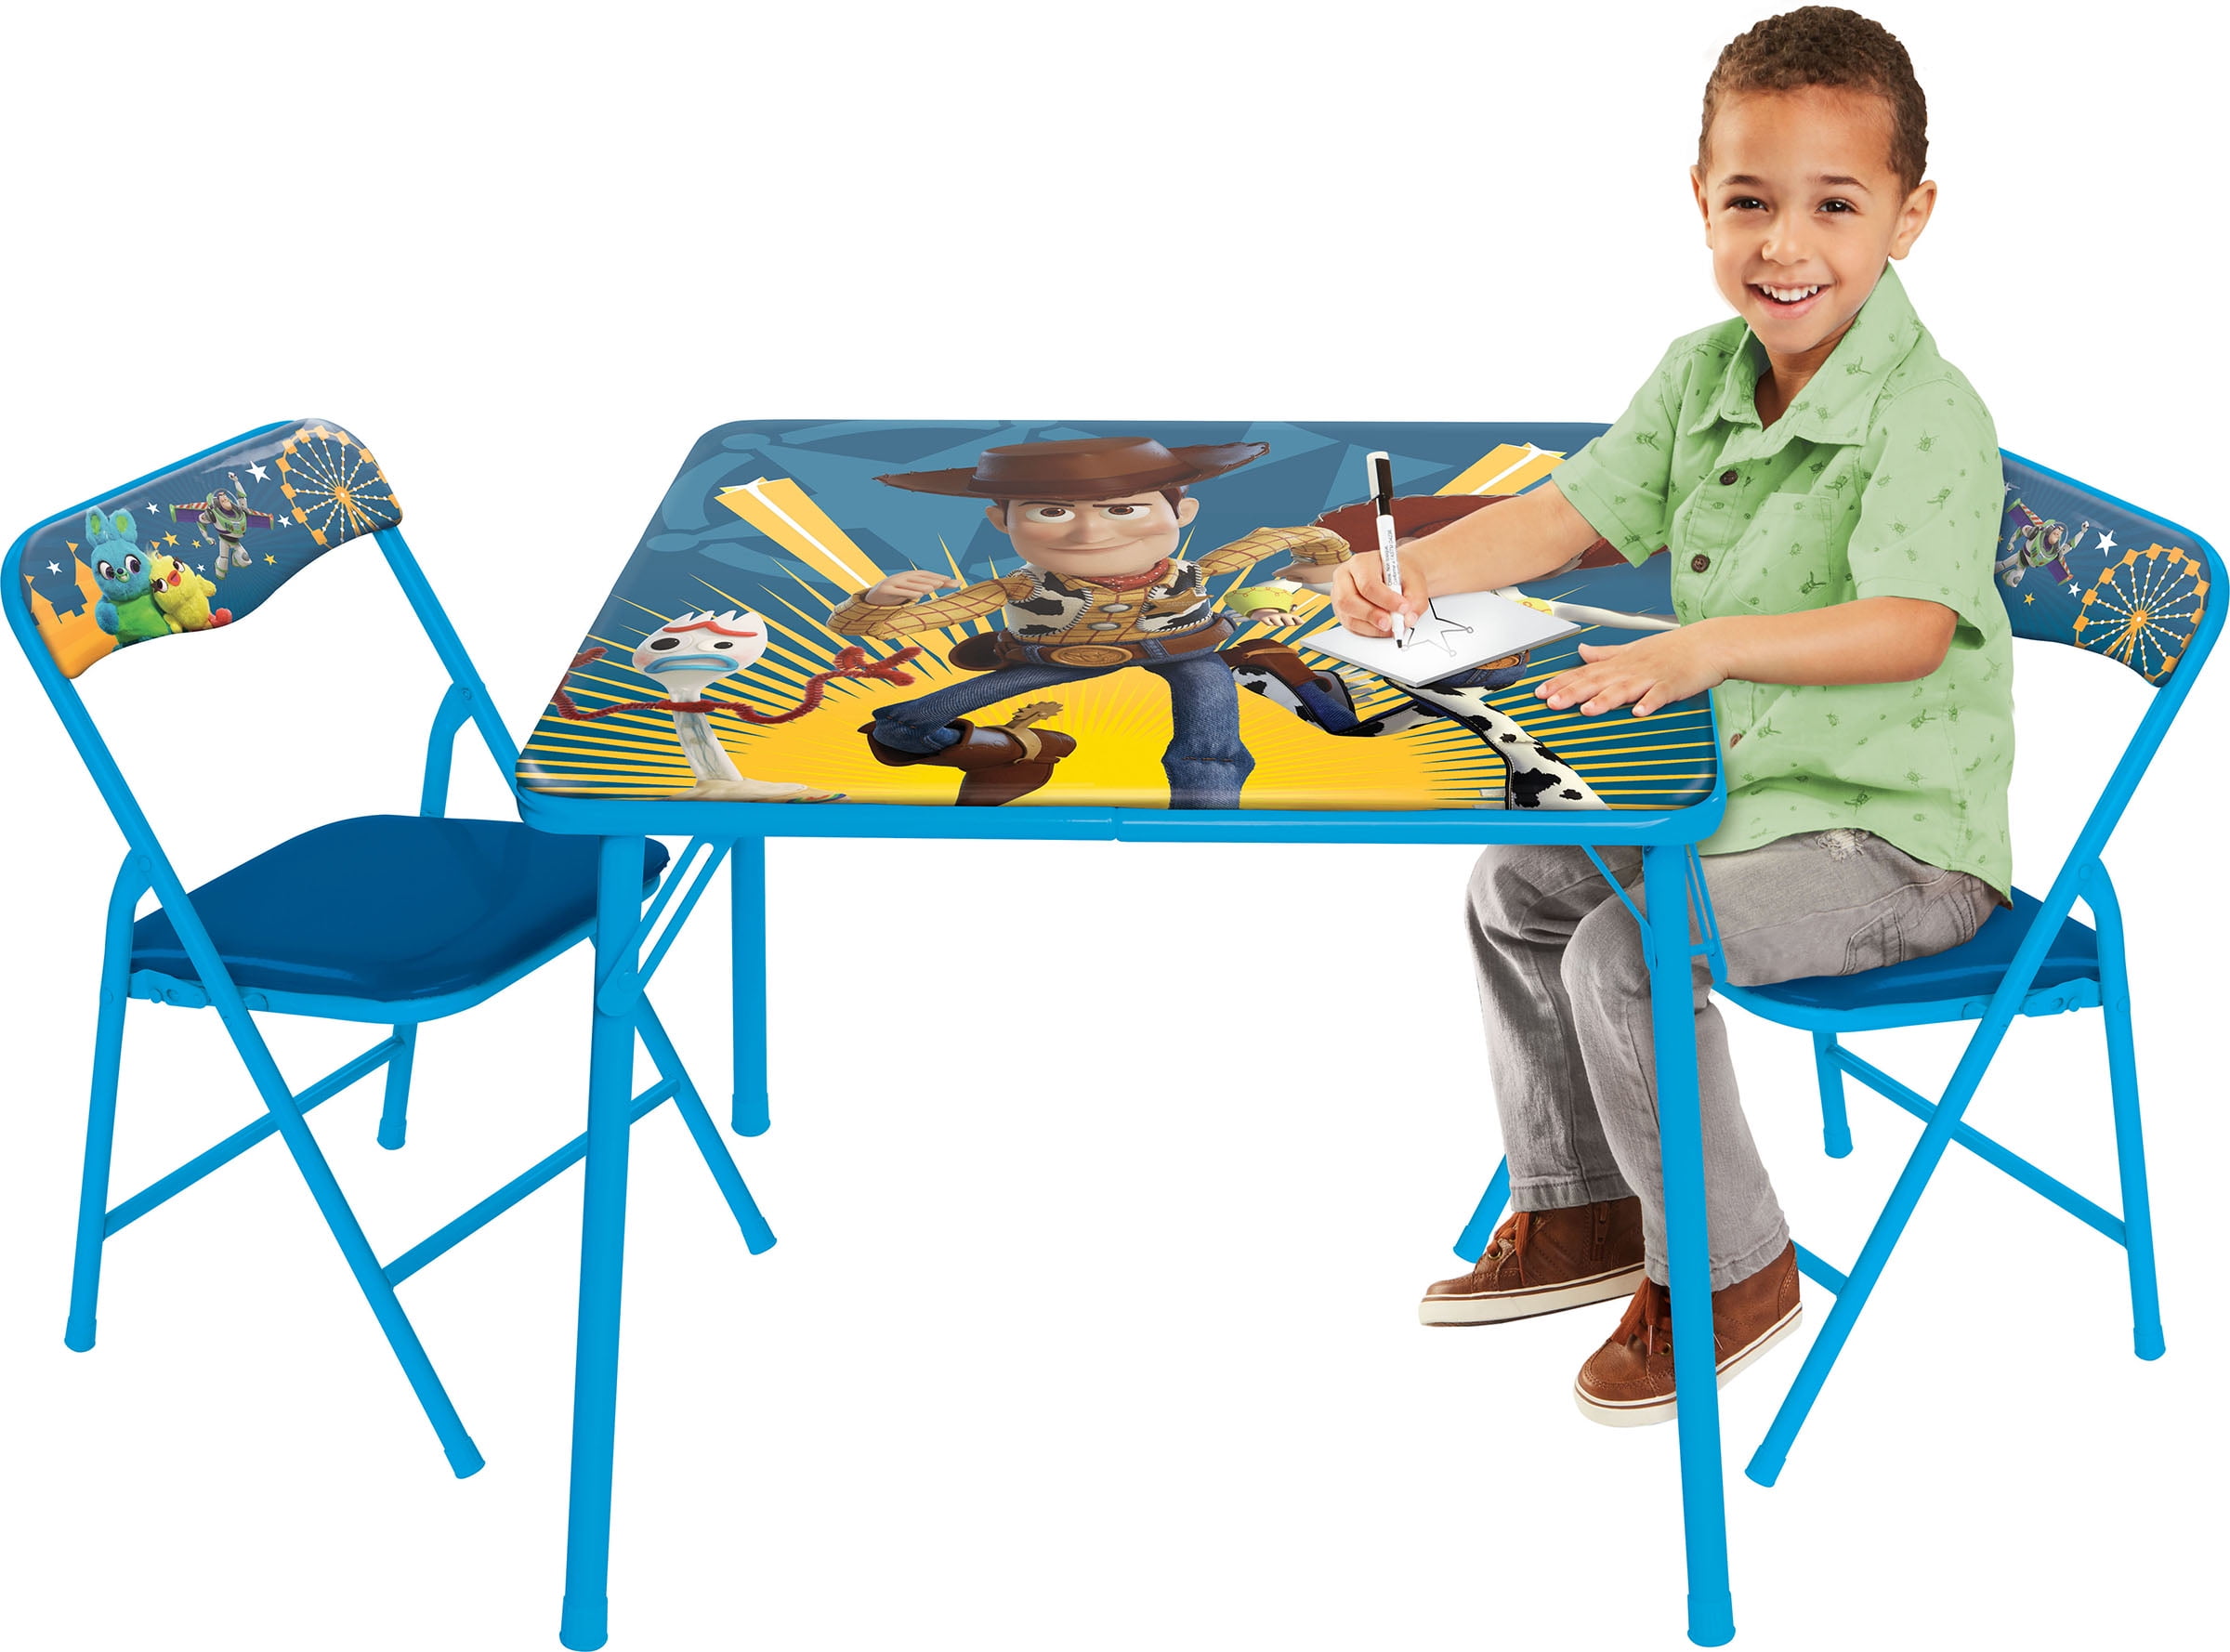 disney folding table and chairs